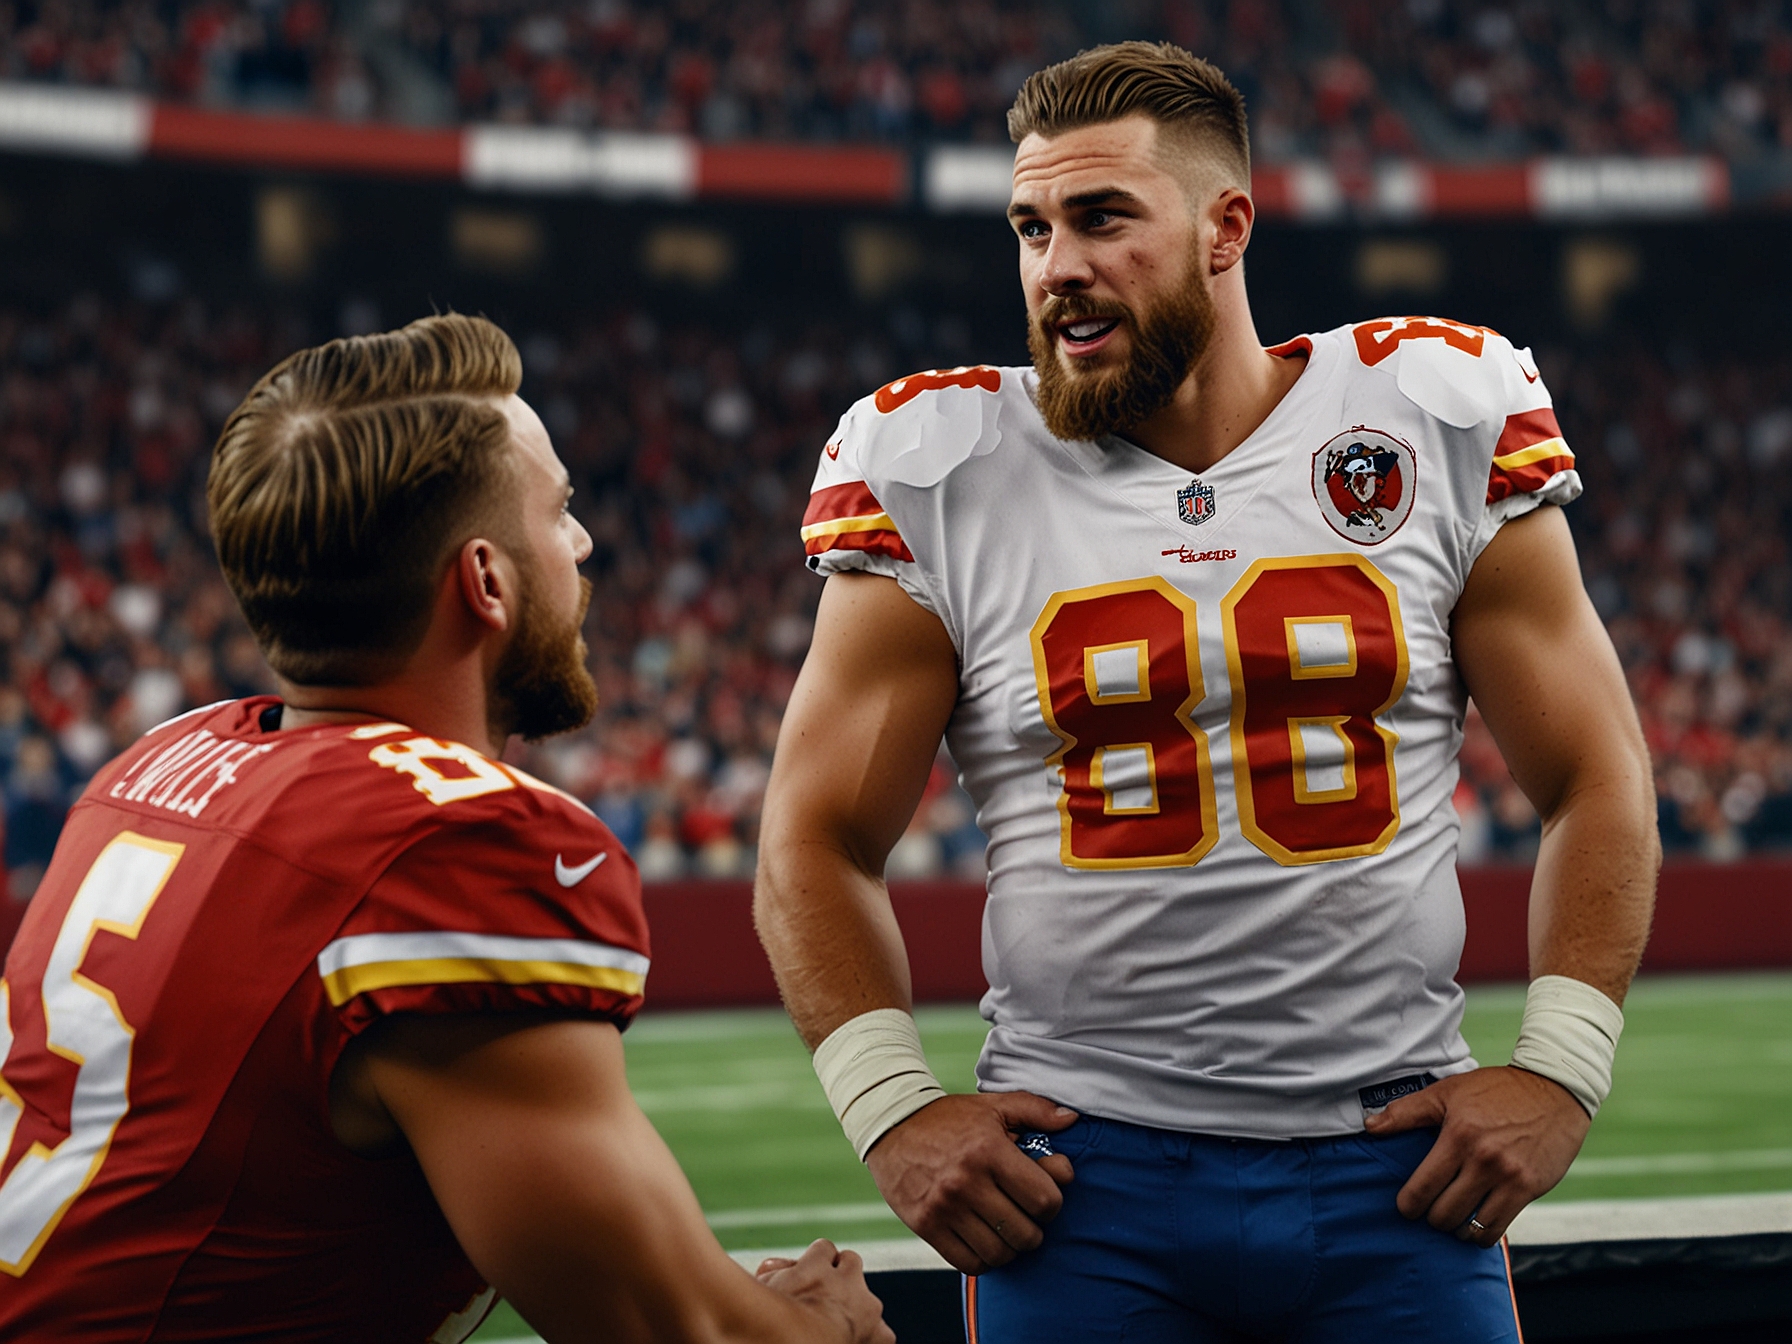 Travis Kelce discussing Taylor Swift's attendance at the NFL game during a candid interview, highlighting her decision to reject VIP accommodations and experience the game with the regular crowd.